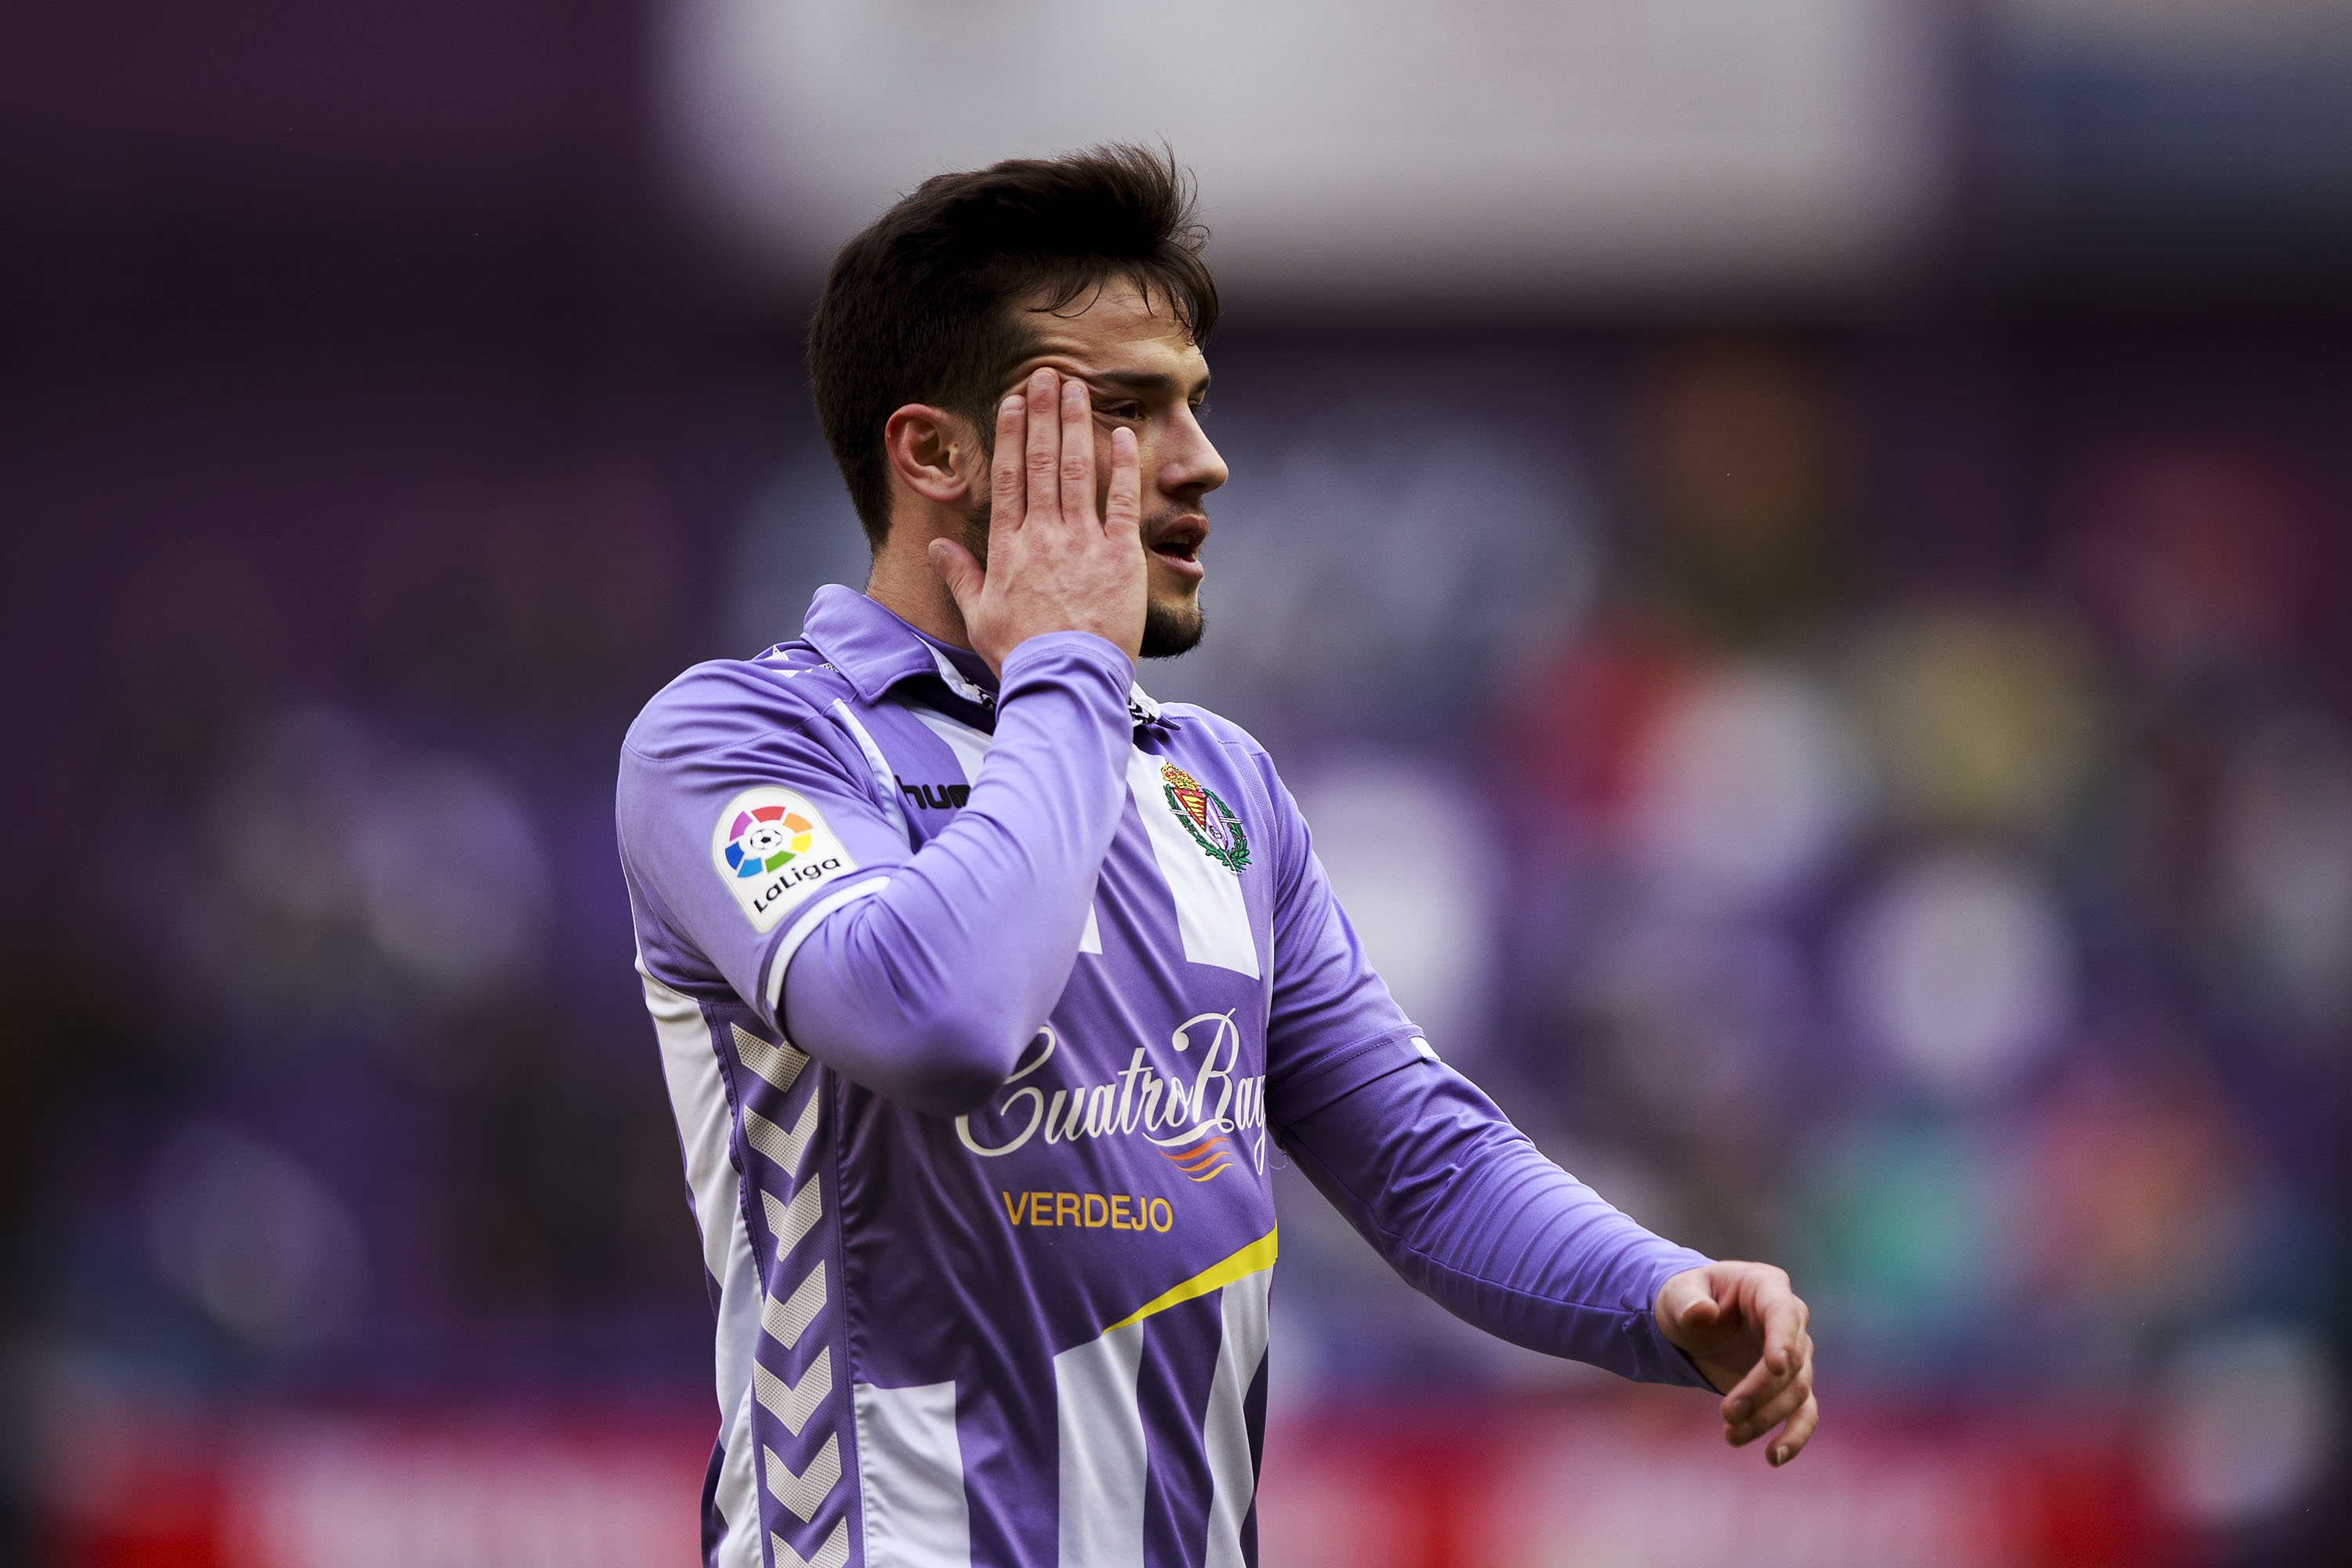 VALLADOLID, SPAIN - FEBRUARY 12:  Jose Arnaiz of Real Valladolid CF reacts as he fails to score during the La Liga second league match between Real Valladolid CF and CD Tenerife at Estadio Jose Zorrilla on February 12, 2017 in Valladolid, Spain.  (Photo by Gonzalo Arroyo Moreno/Getty Images)